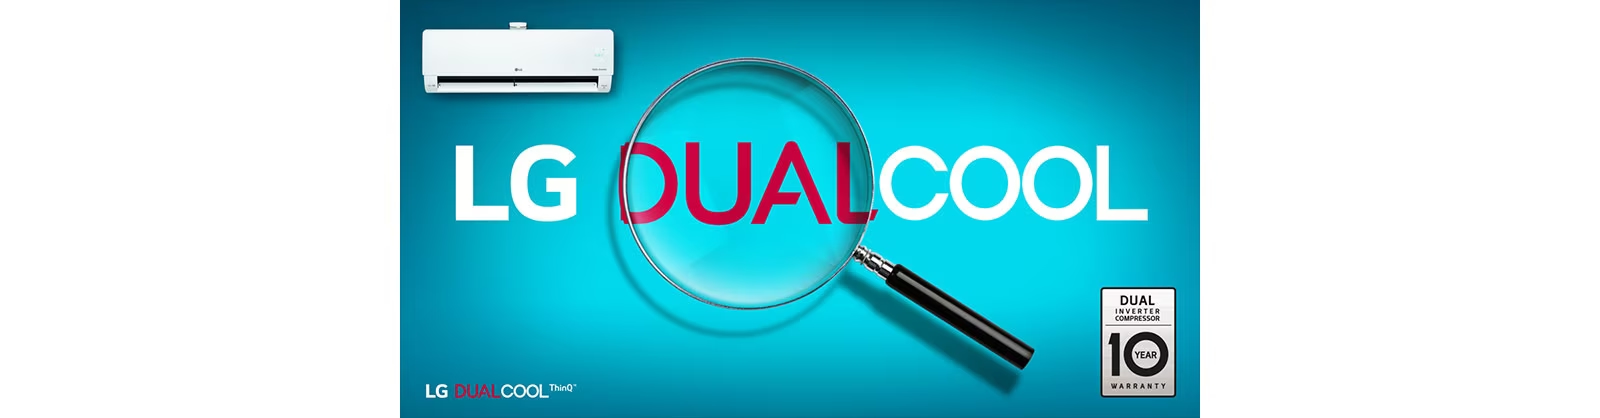 LG Dual Cool's letter is enlarged with a magnifying glass to emphasize it.